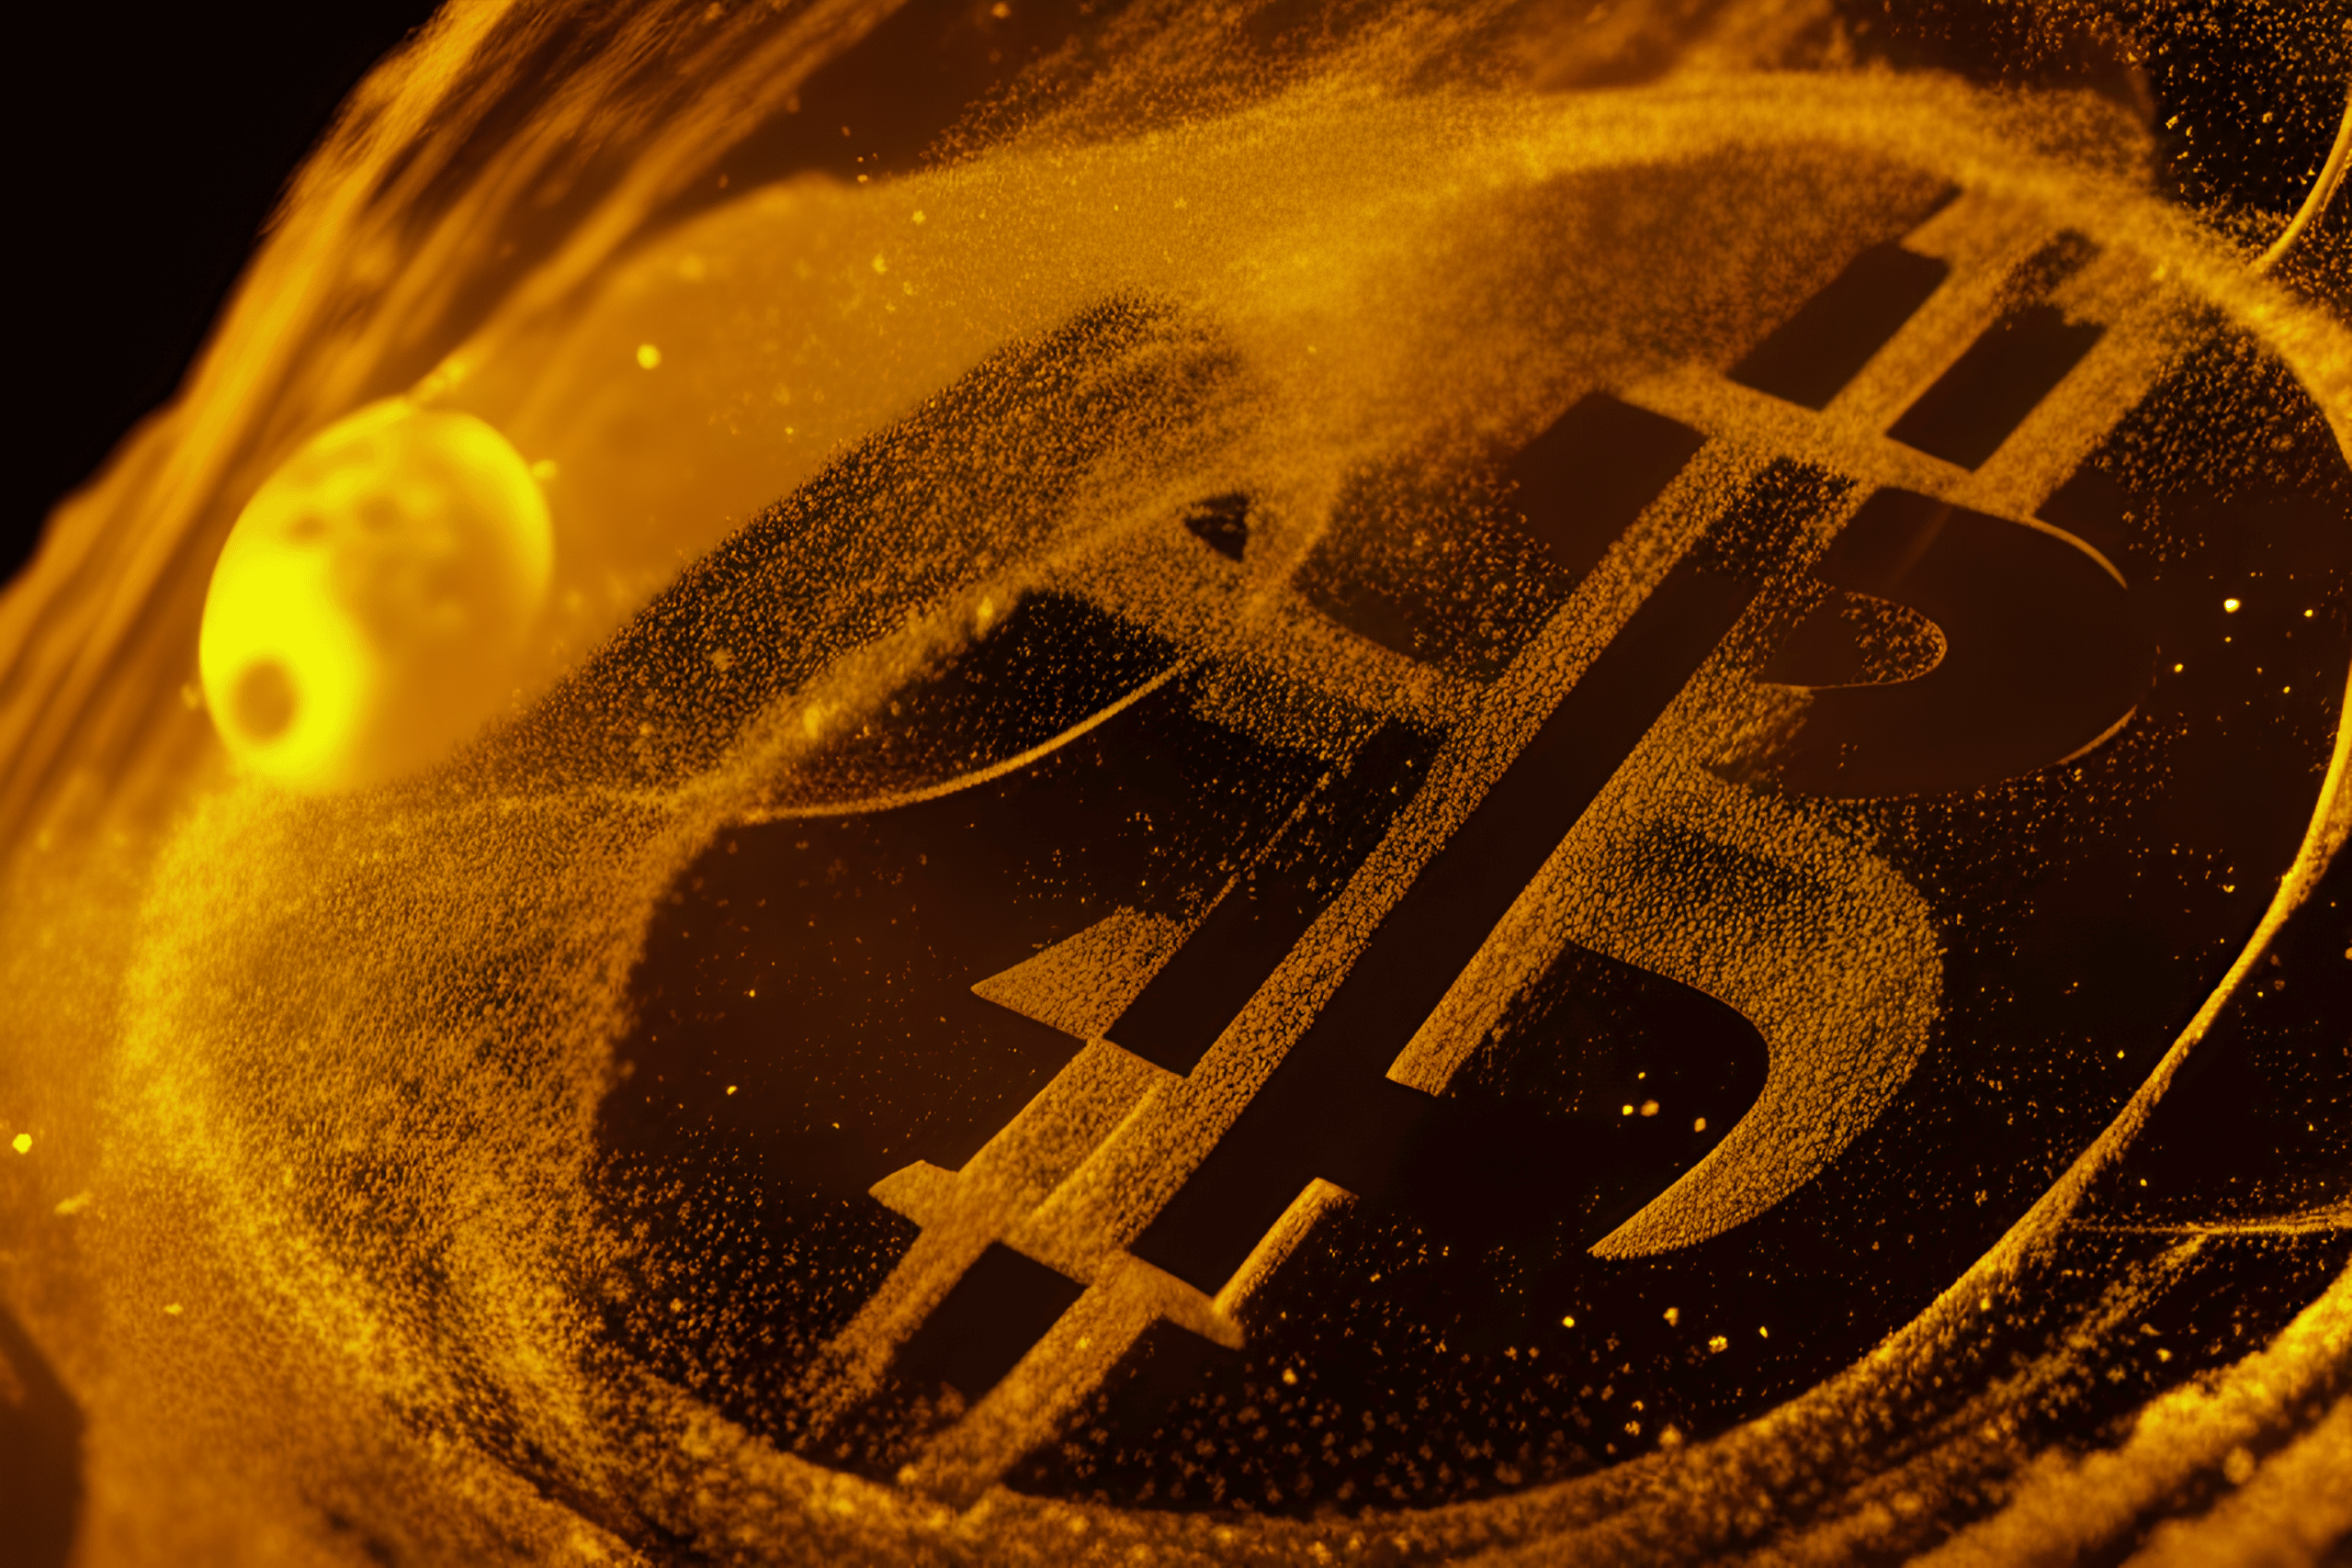 BTC enters another phase of low volatility; here’s what investors should expect